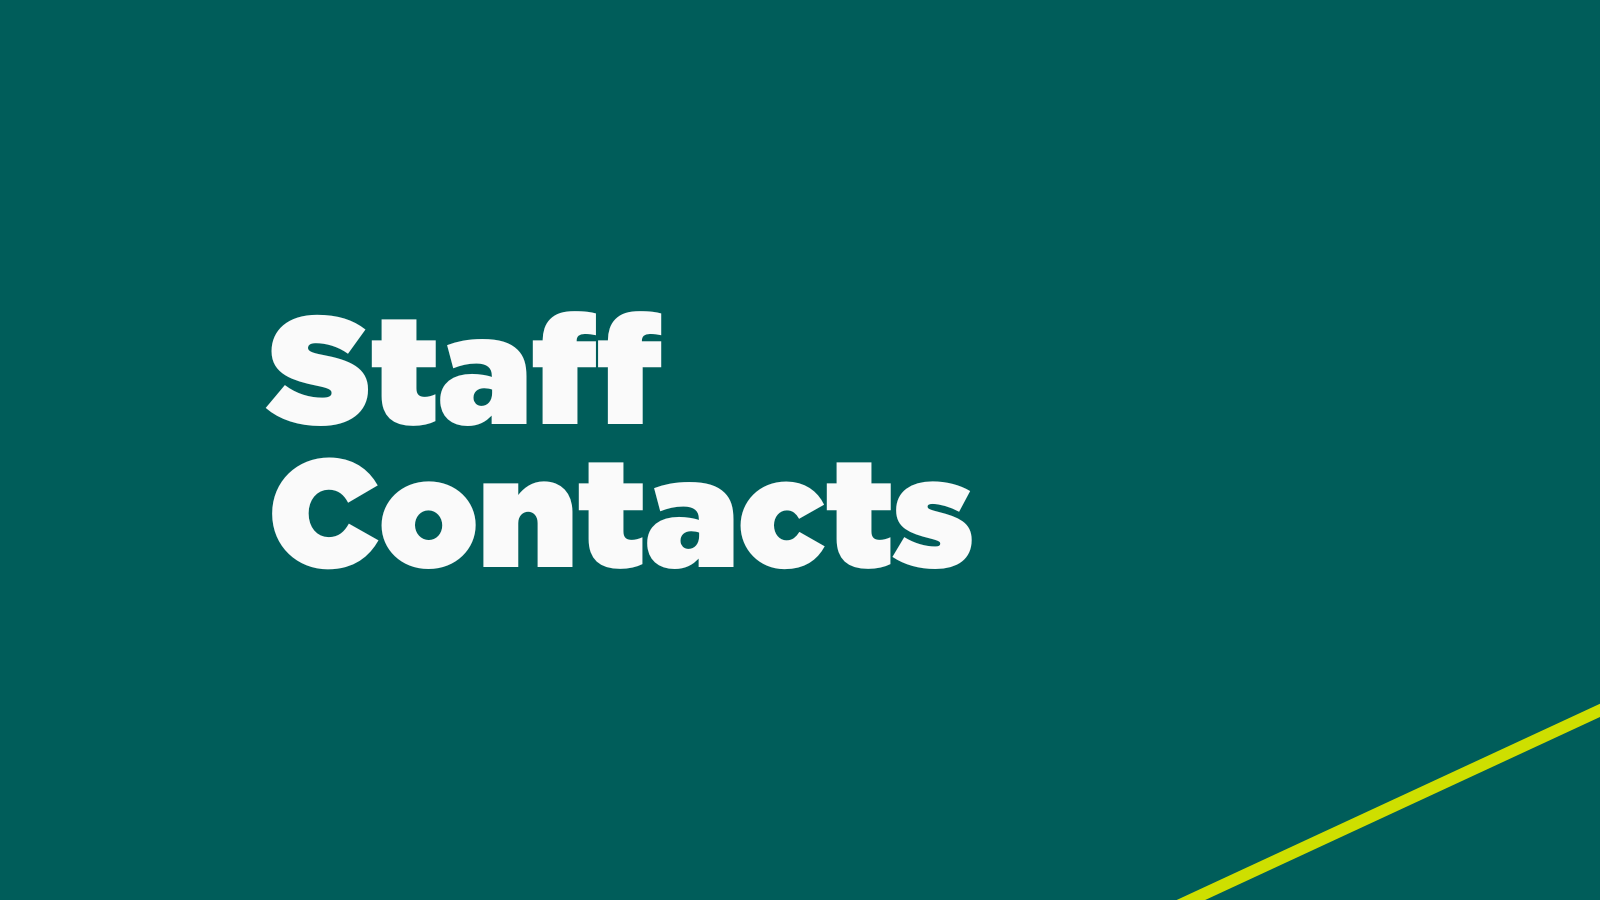 Staff Contacts